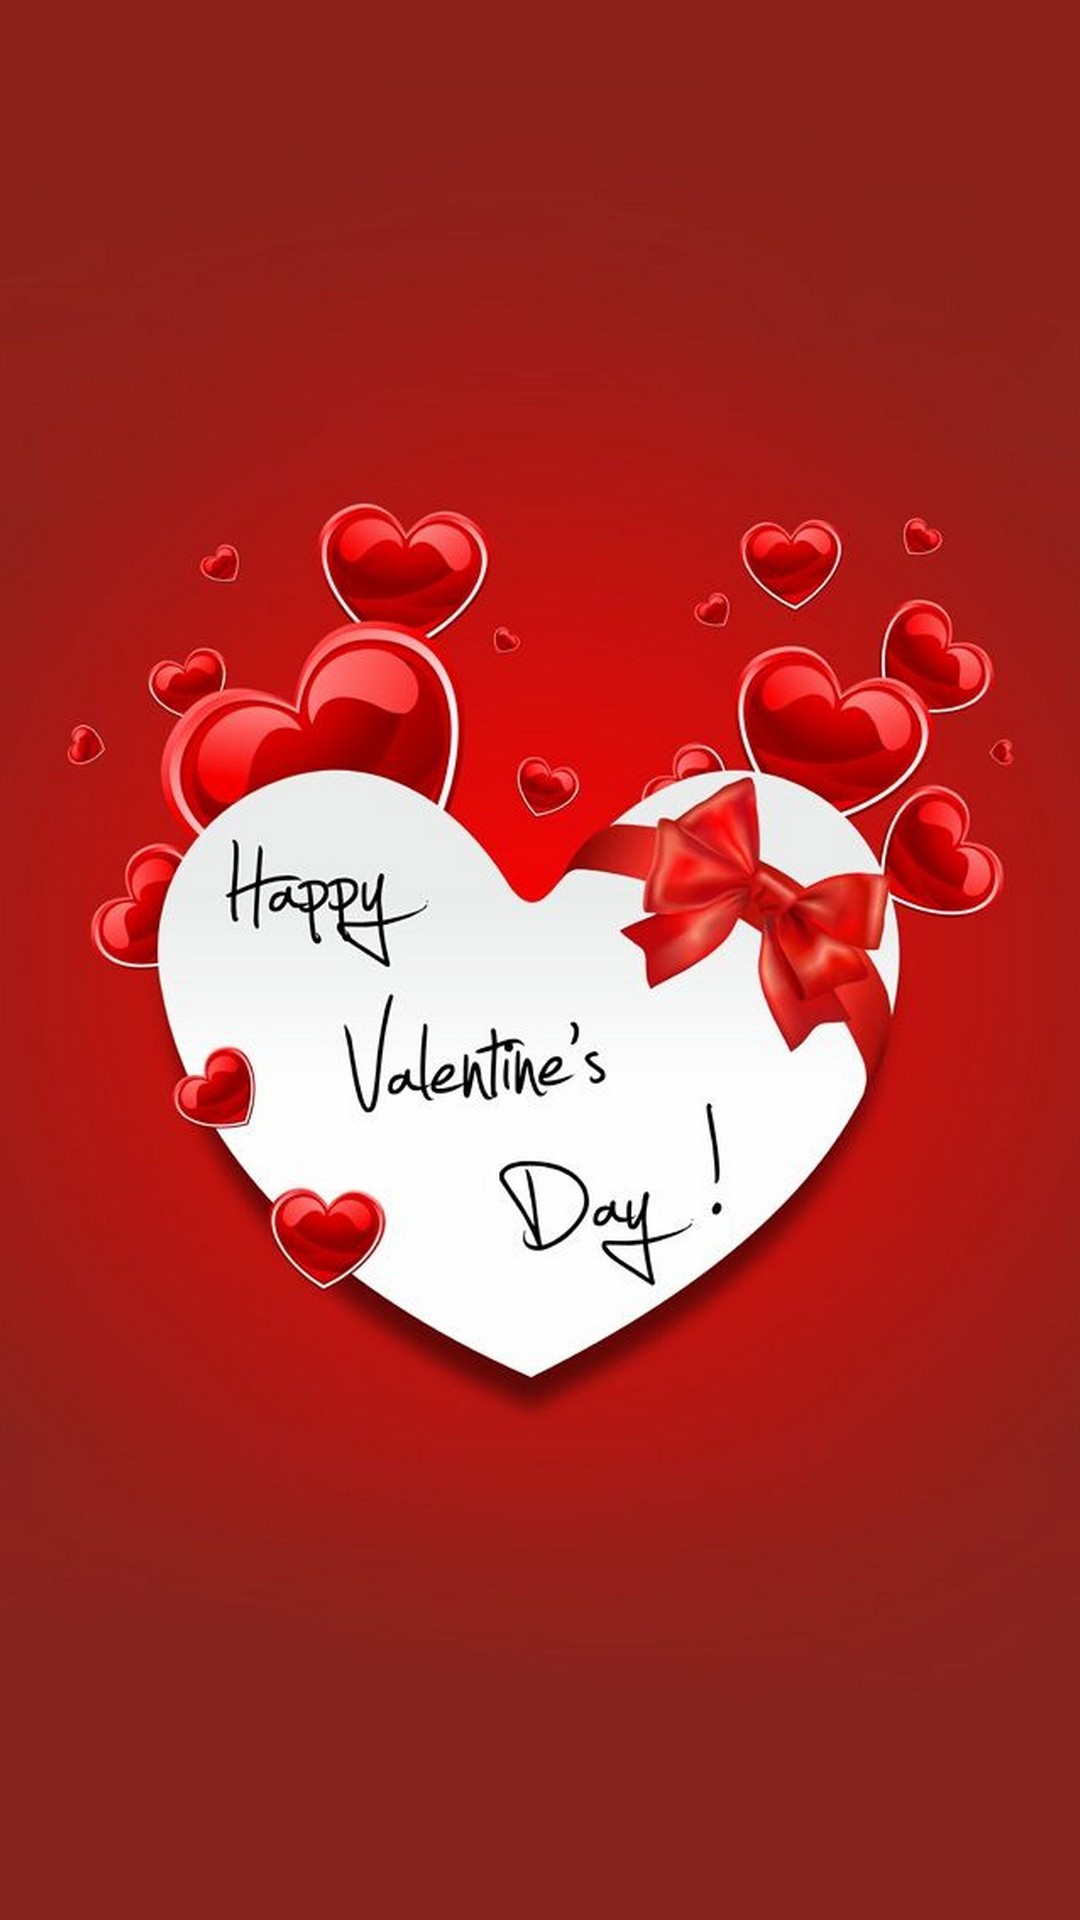 happy wallpaper,heart,love,red,text,valentine's day